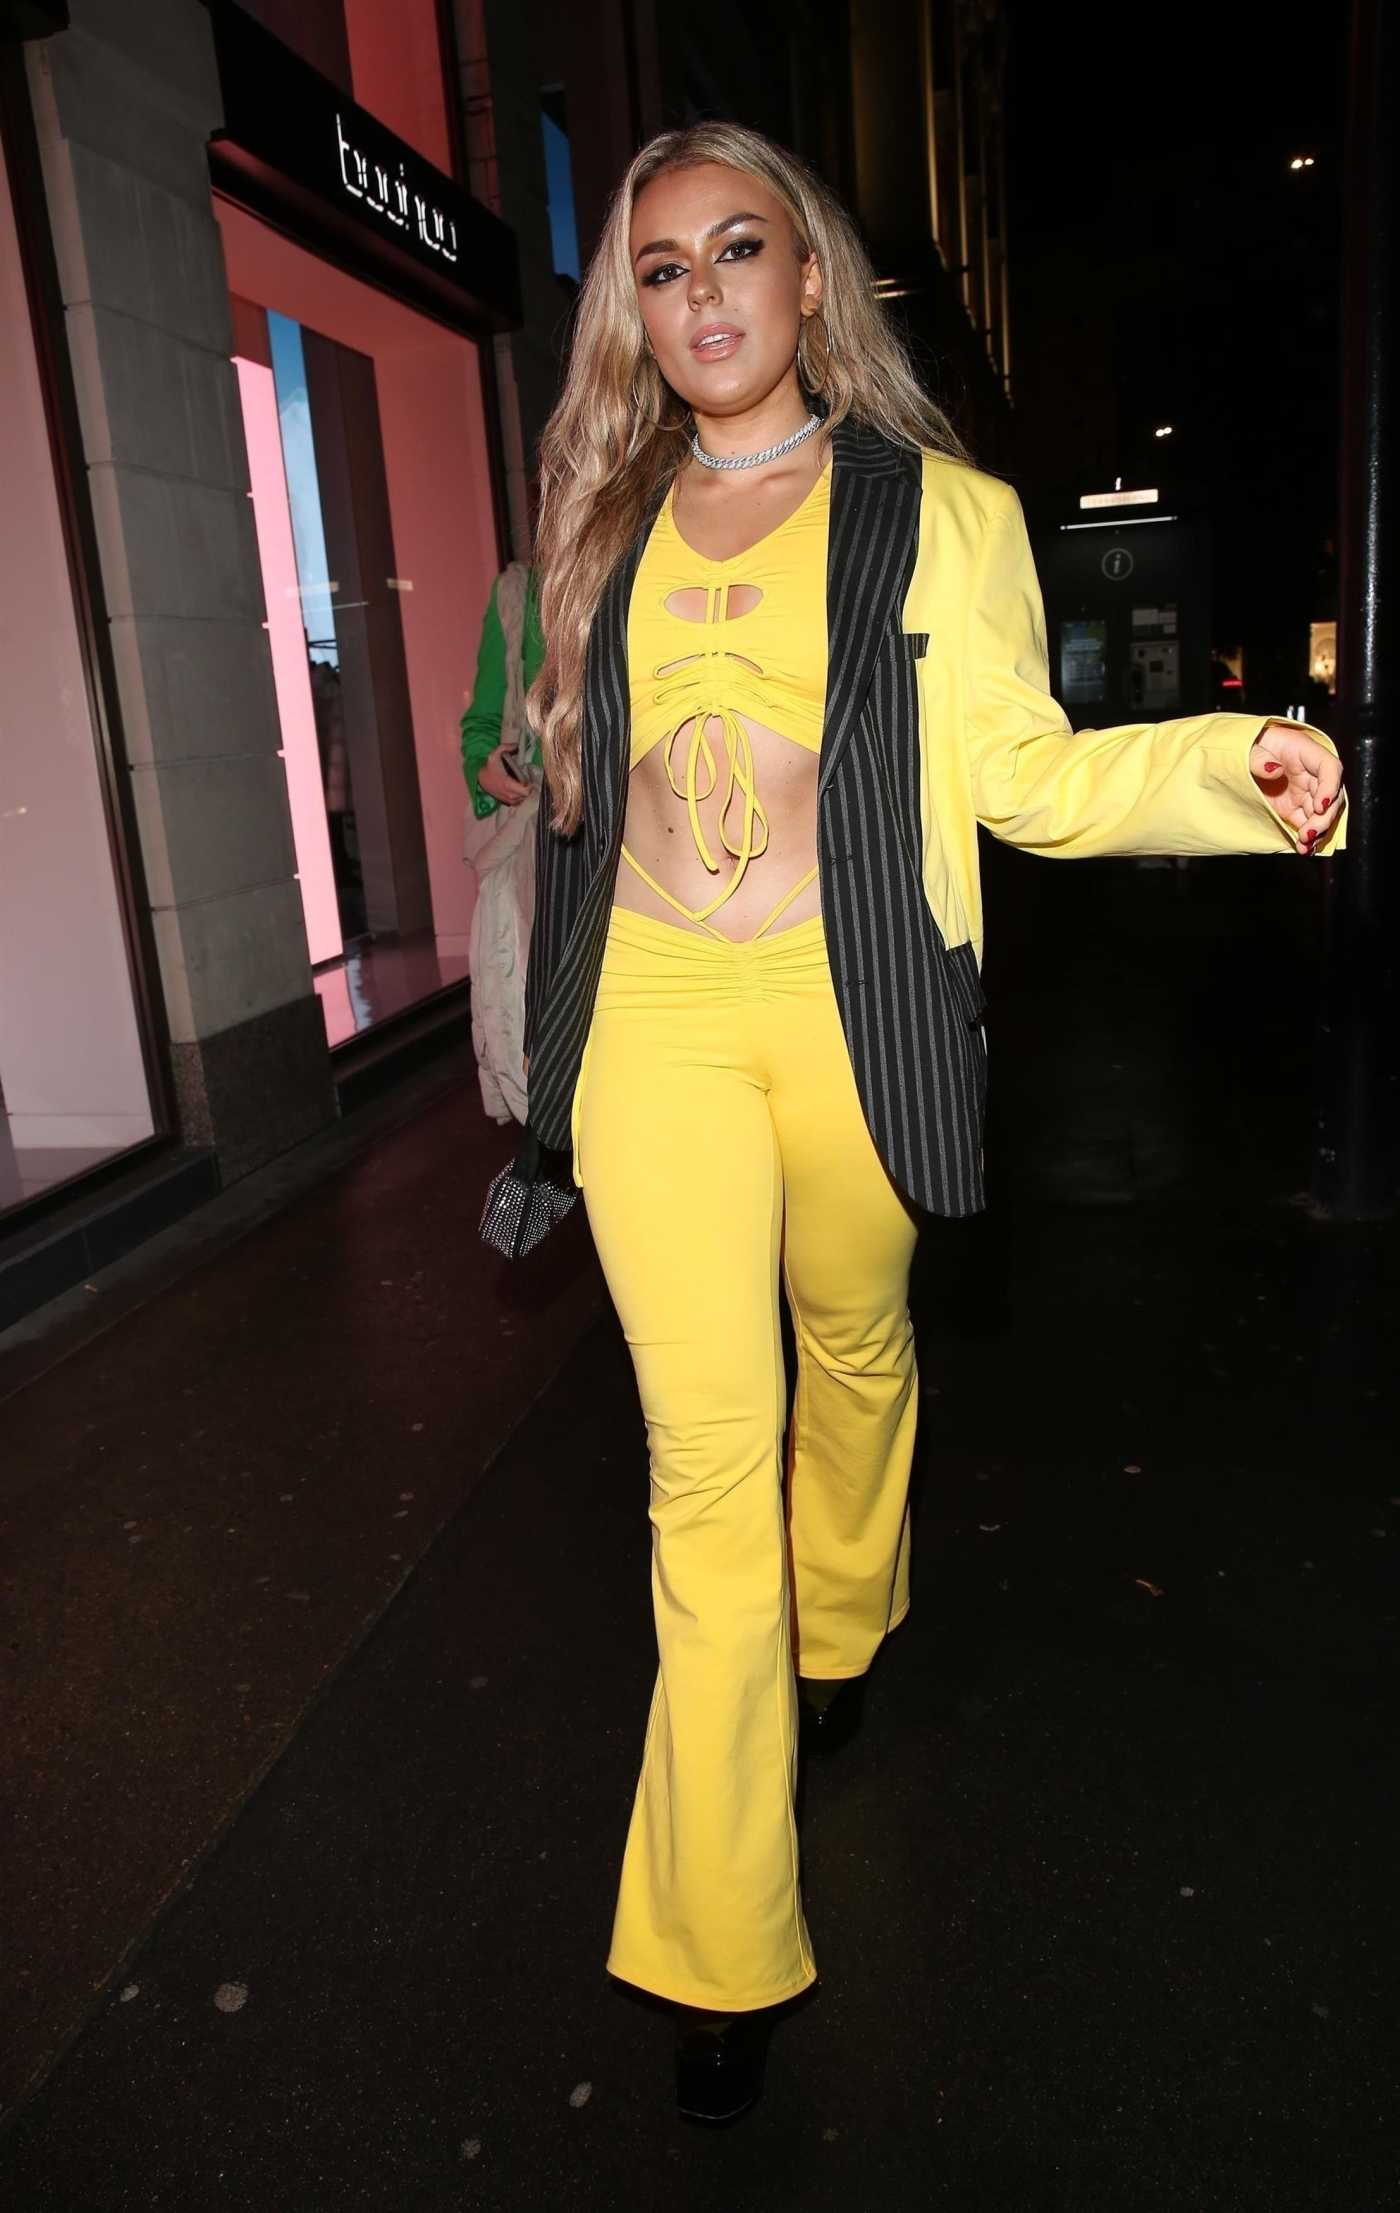 Tallia Storm in a Yellow Ensemble Attends BoohooMAN x Toby Launch Event London 10/07/2021